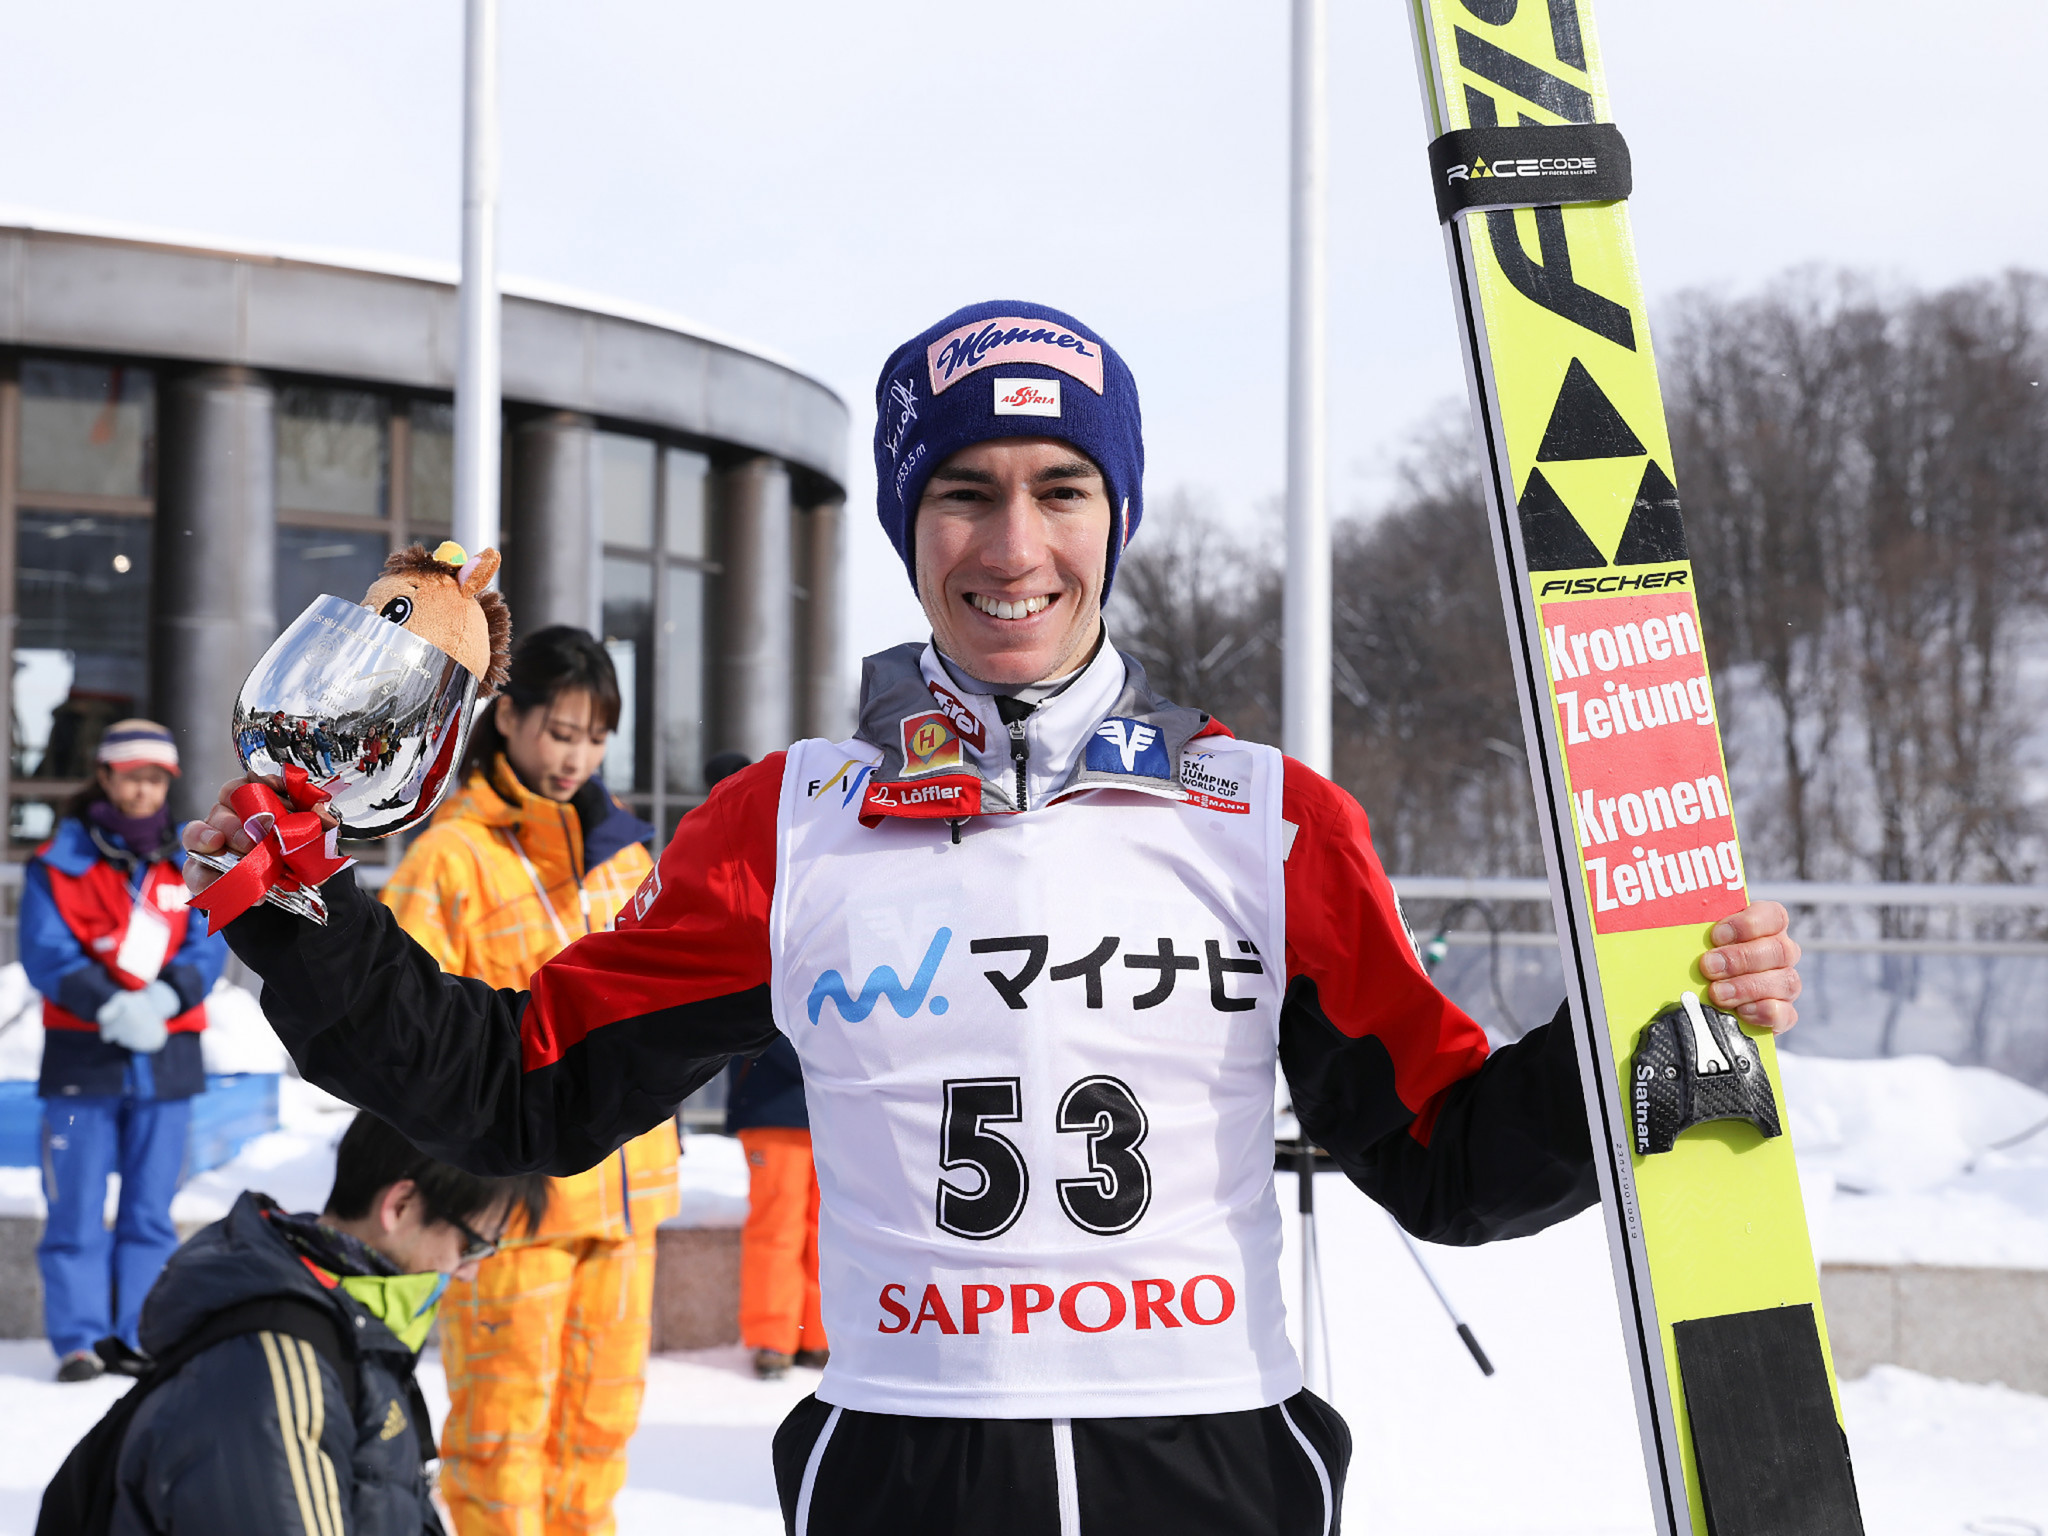 Kraft wins third Ski Jumping World Cup title in a row in Sapporo